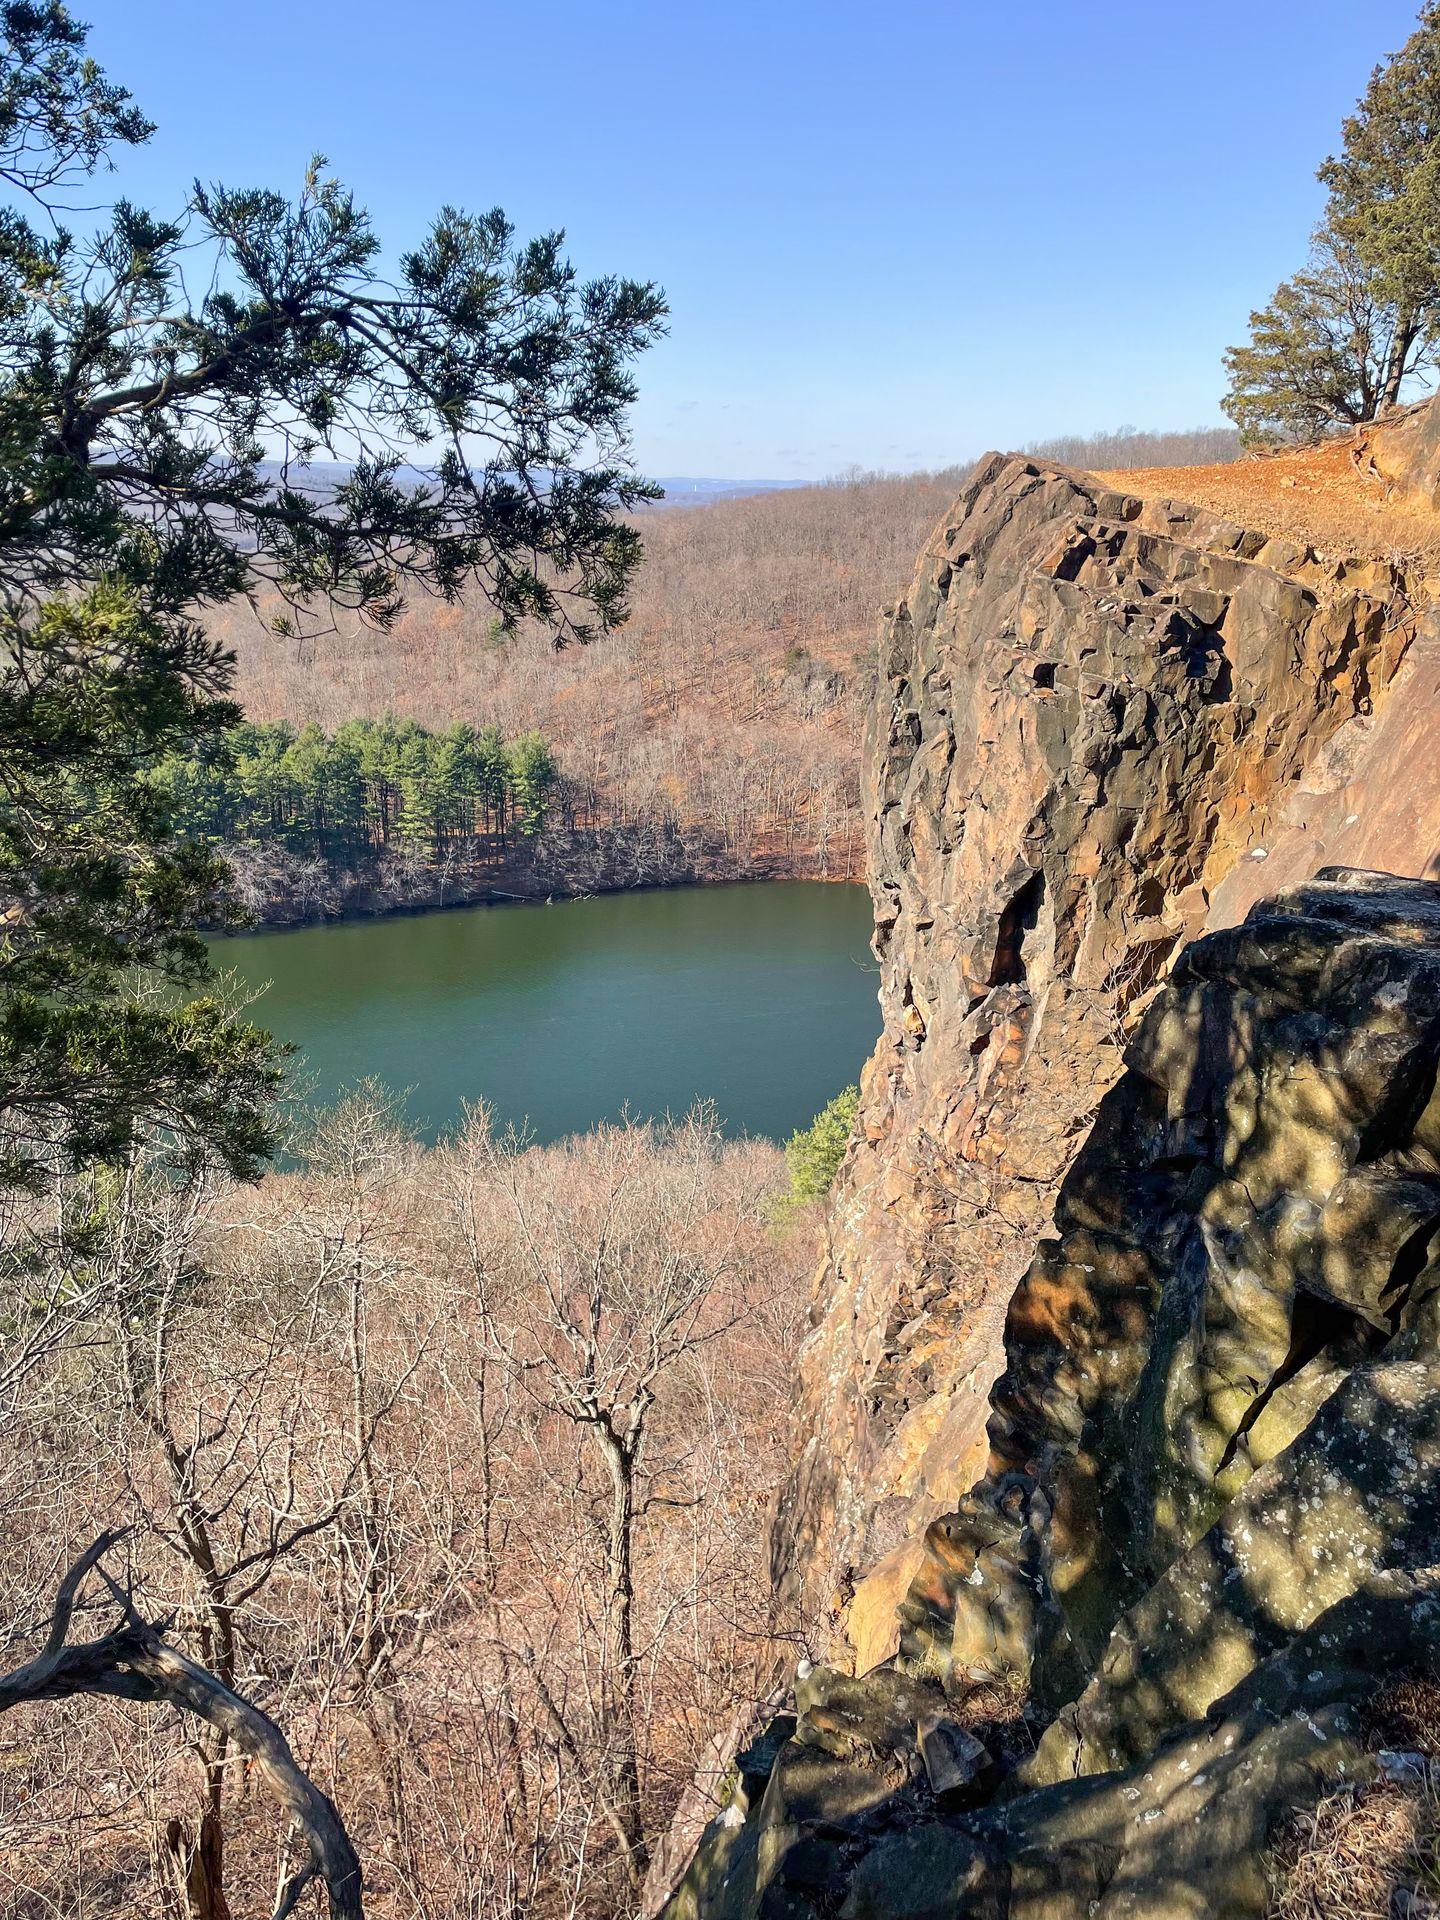 Taken from the top of Chauncey Peak, a rocky cliff stands tall above a lake.